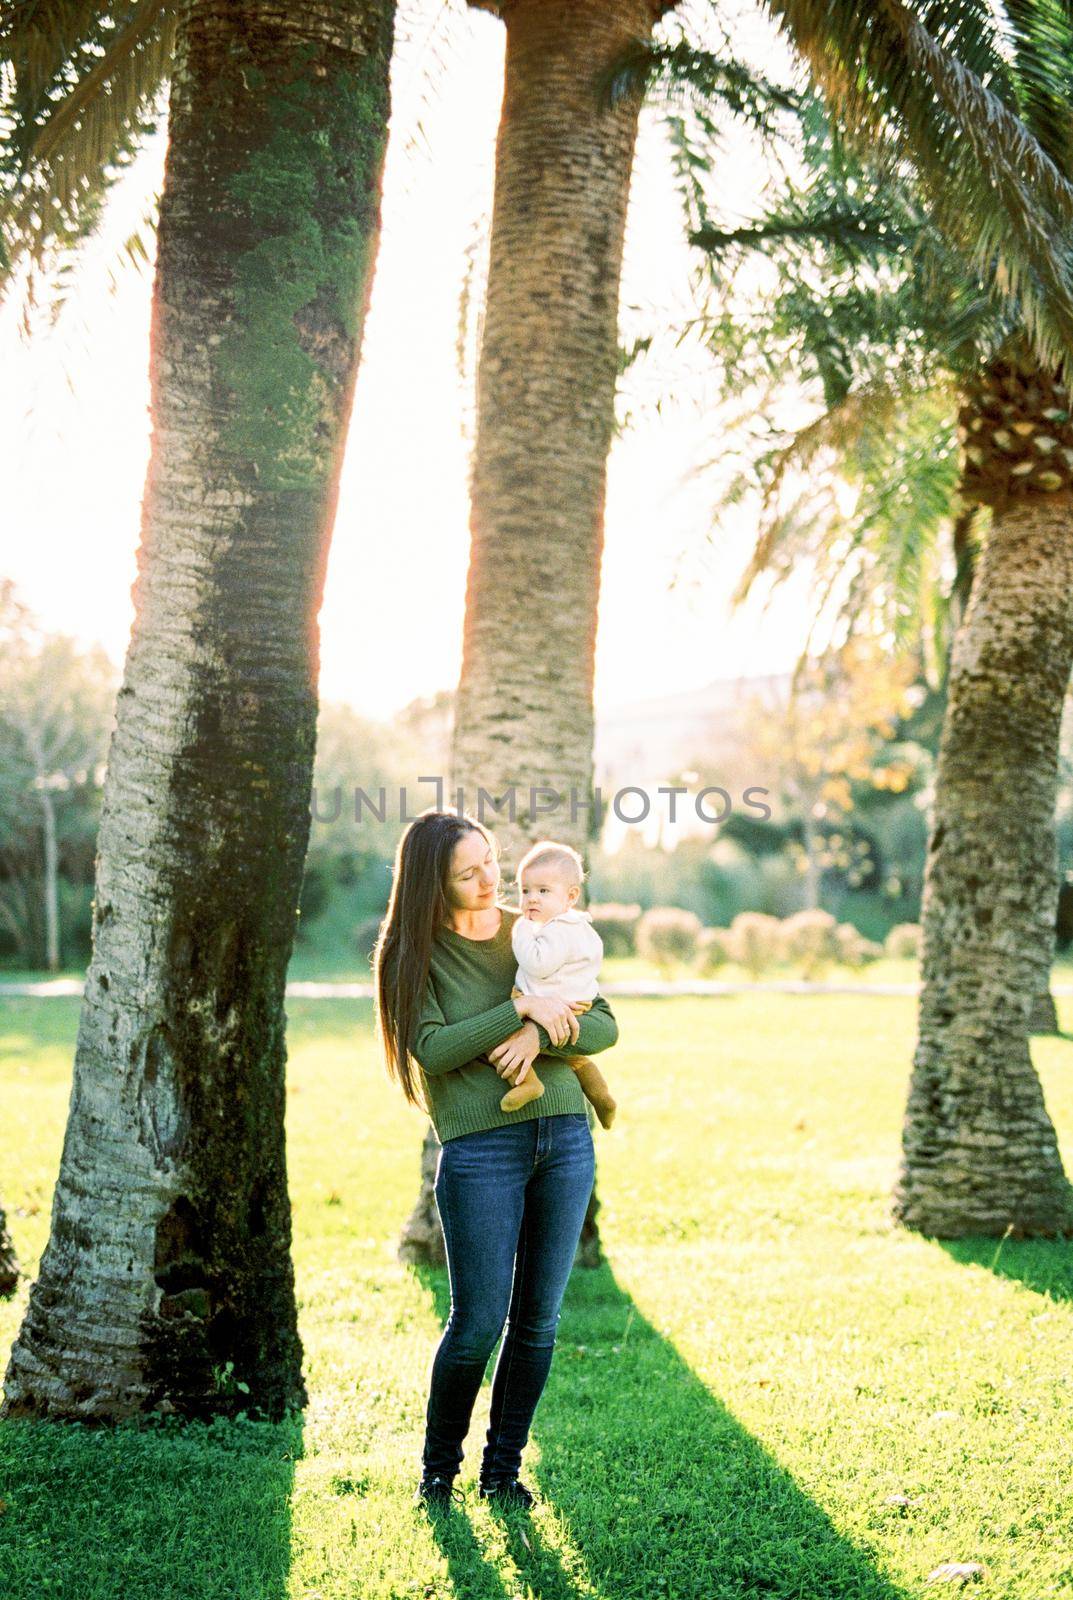 Mom looks at the baby in her arms while standing under a large palm tree by Nadtochiy